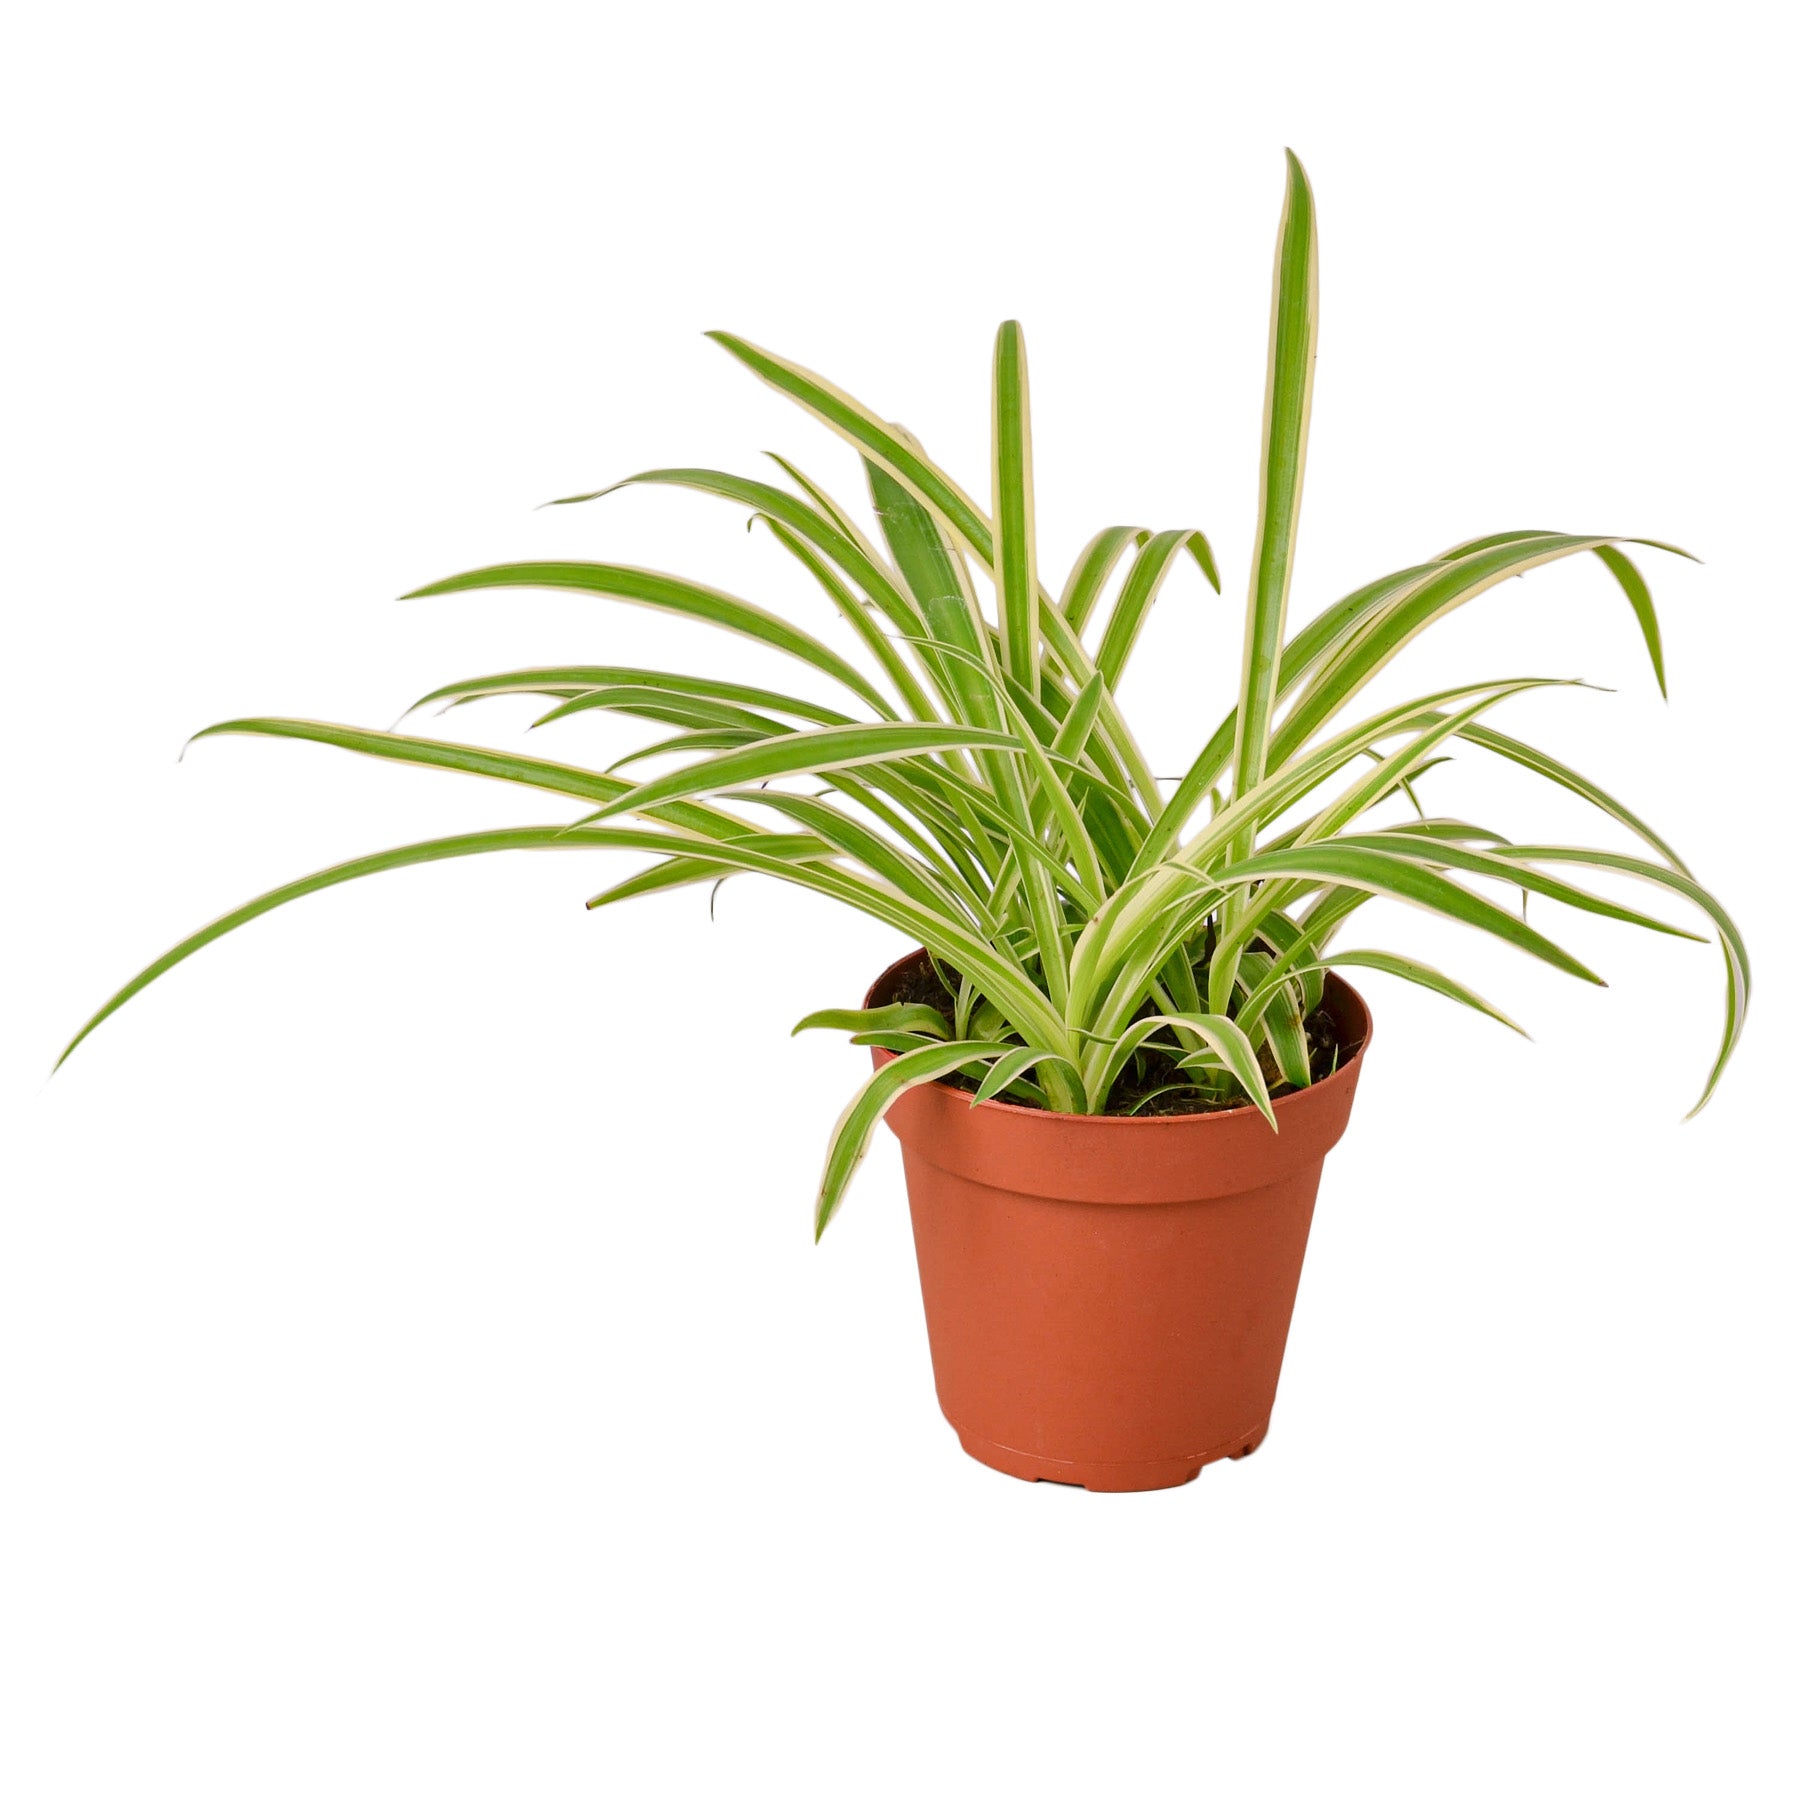 A plant in a pot.